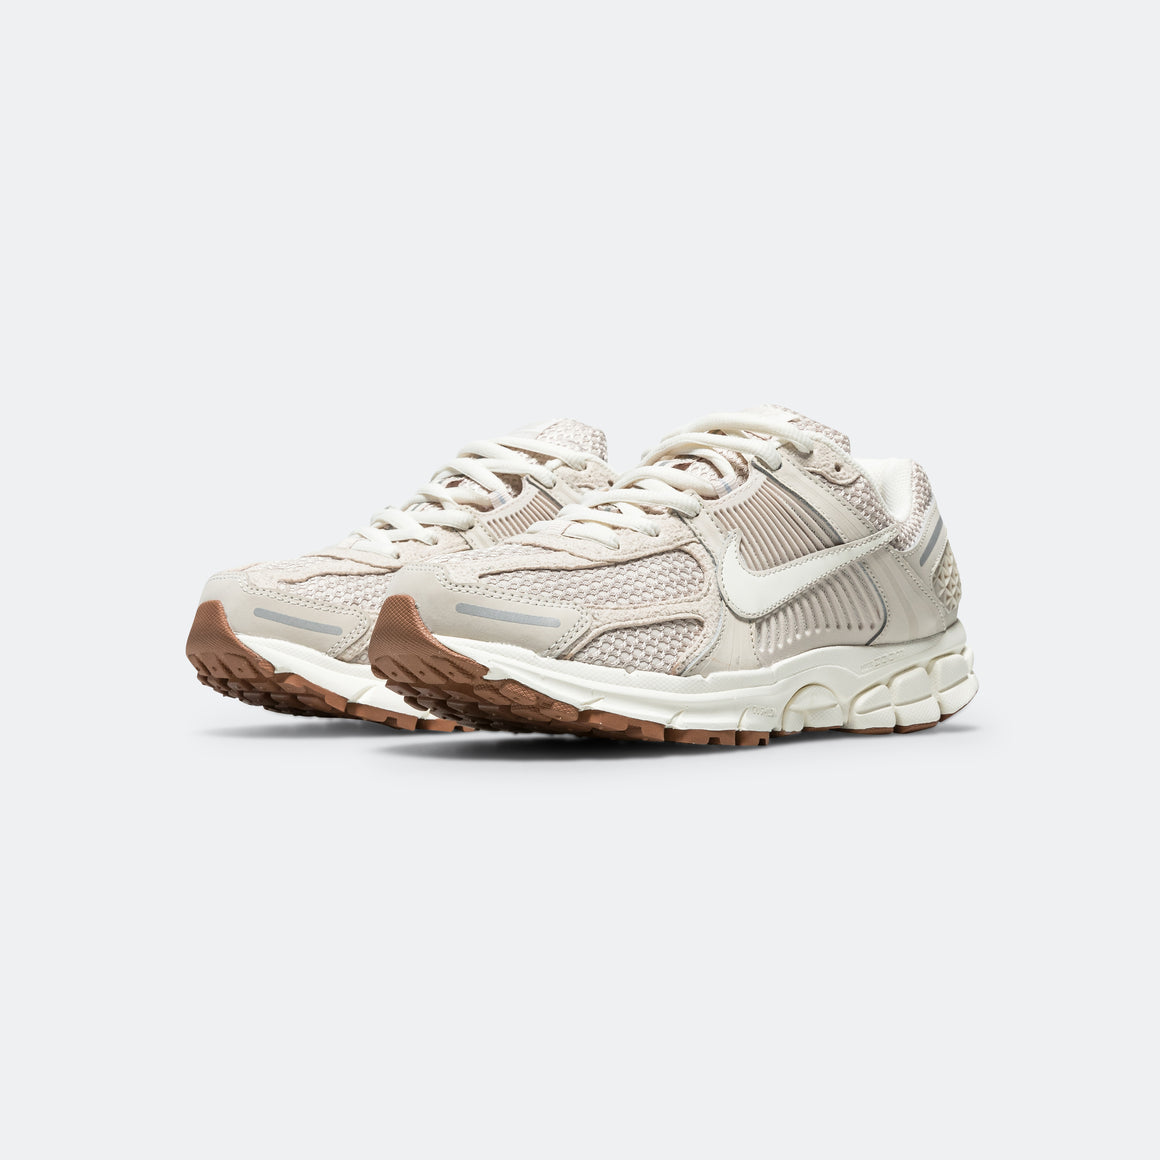 Nike - Womens Zoom Vomero 5 - Lt Orewood Brown/Sail-Metallic Silver - UP THERE